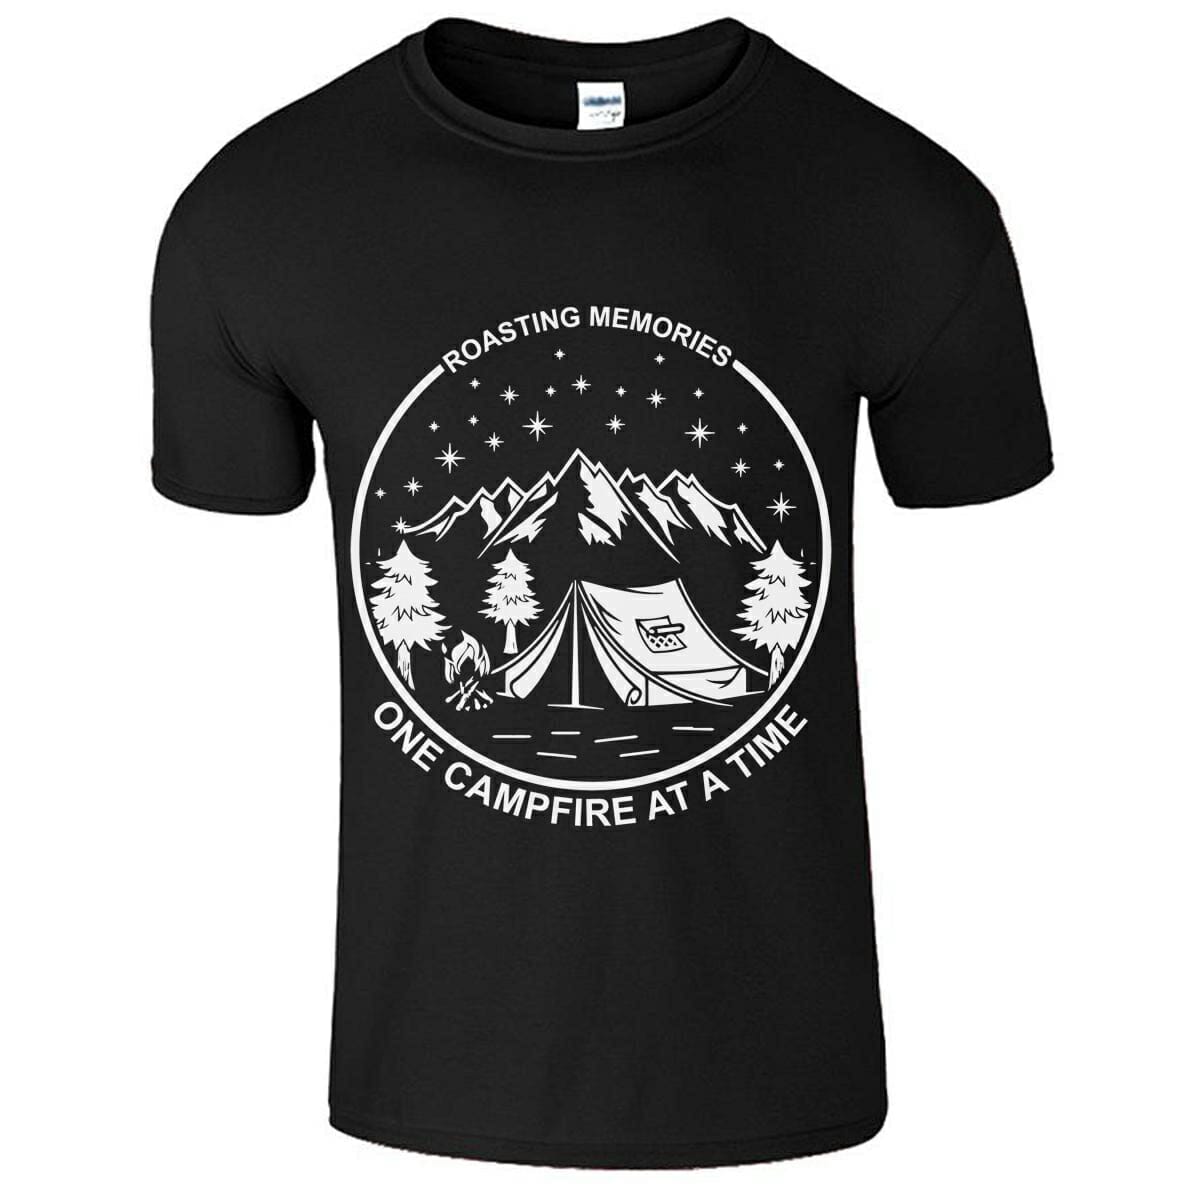 Roasting Memories One CampFire At A Time T-Shirt Design